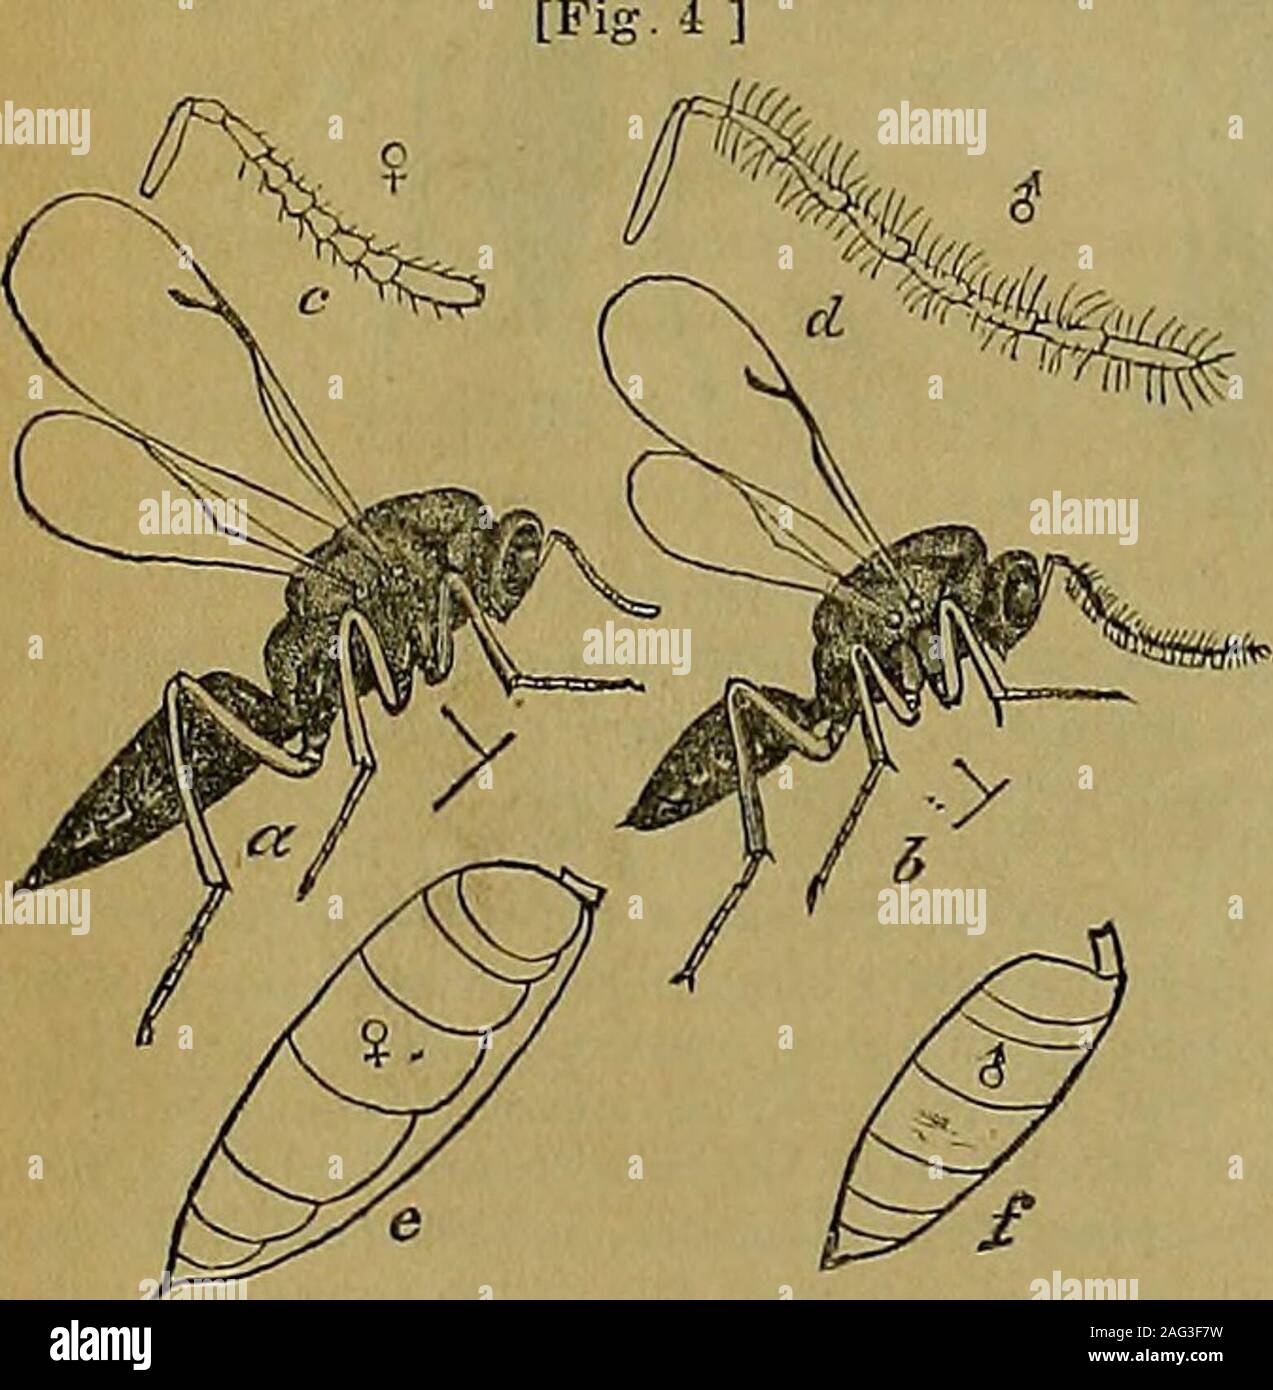 . The American entomologist and botanist. -;^-alls, and 1 found, that y yeilo ihi 1(1 l]ii existence of any:yvt-[ these four so-called5- and 47 Q from Canadianiin«t of tliem were fritici Fitch, two were secalis Fitch, a few verged upon liordeiHarris, and seven verged u])ou/«/:iiy&gt;(?s Fitch; and that num-erous intermediate grailes occurred between all these fourforms. Therefore, I incline to believe that Fitchs threeso-calie&lt;I species are—so far as the facts indicate—meresynonyms of hordei Harris; and that the correct name lor allthe Joint-worm Flius that infest small grain is Jsosoma h Stock Photo